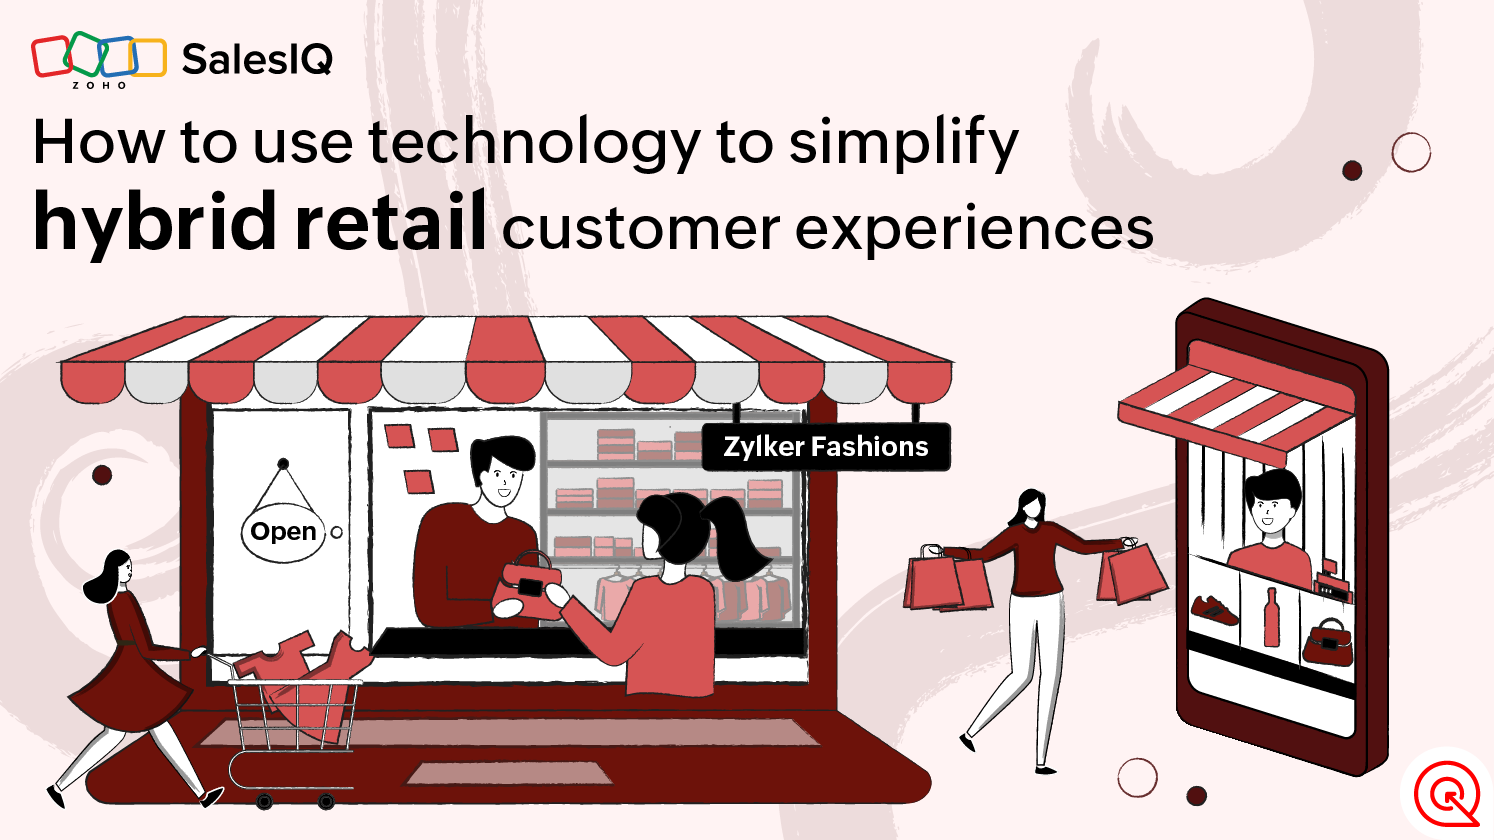 How to use technology to simplify hybrid retail customer experiences